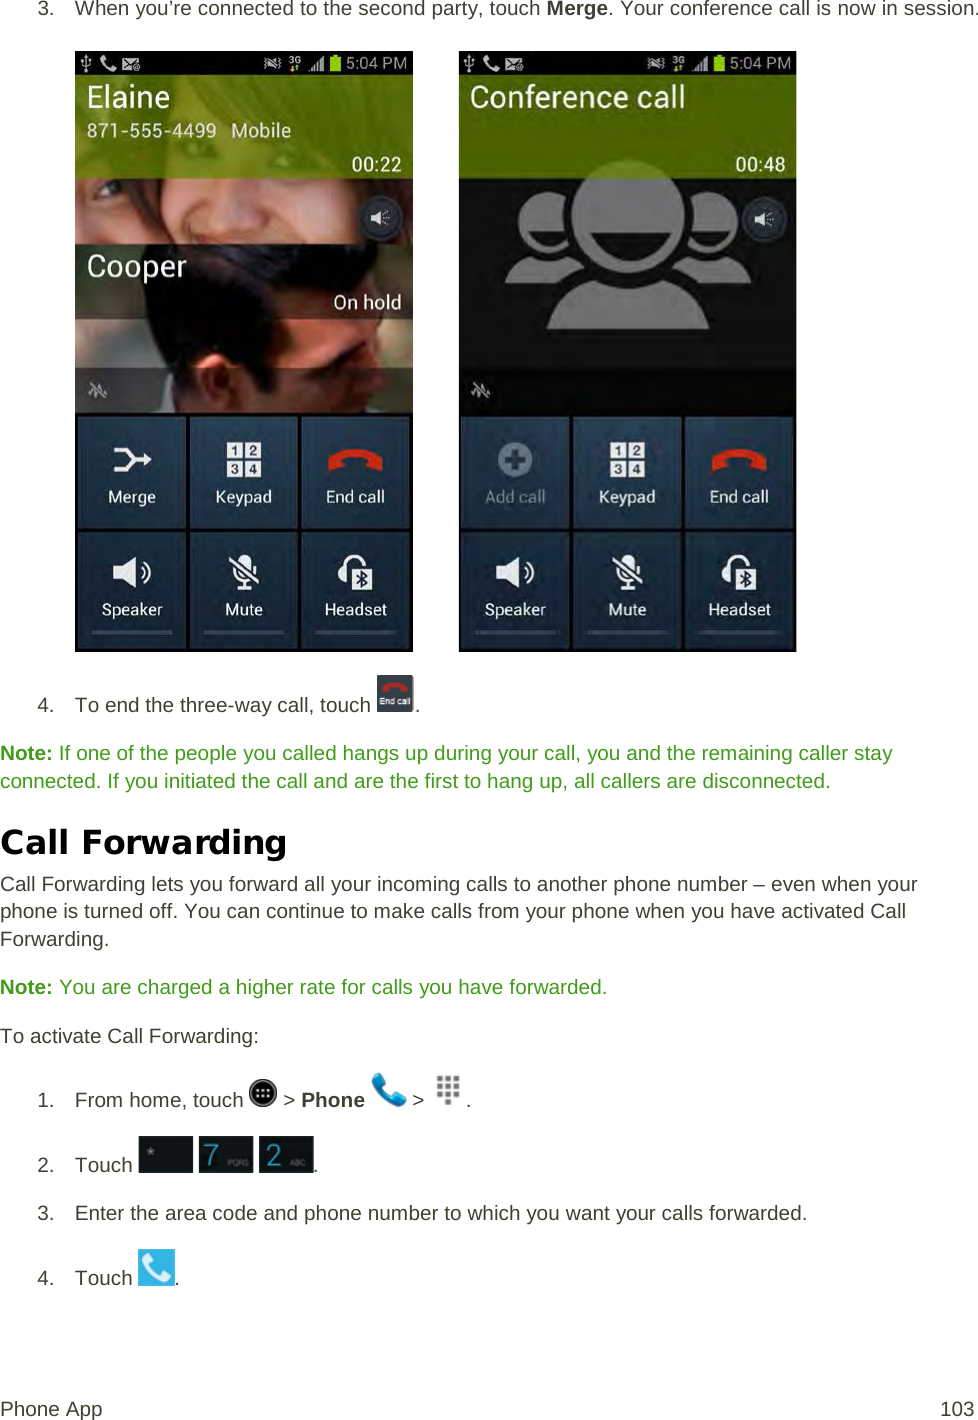 3. When you’re connected to the second party, touch Merge. Your conference call is now in session.            4. To end the three-way call, touch  . Note: If one of the people you called hangs up during your call, you and the remaining caller stay connected. If you initiated the call and are the first to hang up, all callers are disconnected. Call Forwarding Call Forwarding lets you forward all your incoming calls to another phone number – even when your phone is turned off. You can continue to make calls from your phone when you have activated Call Forwarding. Note: You are charged a higher rate for calls you have forwarded. To activate Call Forwarding: 1.  From home, touch   &gt; Phone   &gt;  . 2. Touch      . 3. Enter the area code and phone number to which you want your calls forwarded. 4. Touch  .  Phone App 103 